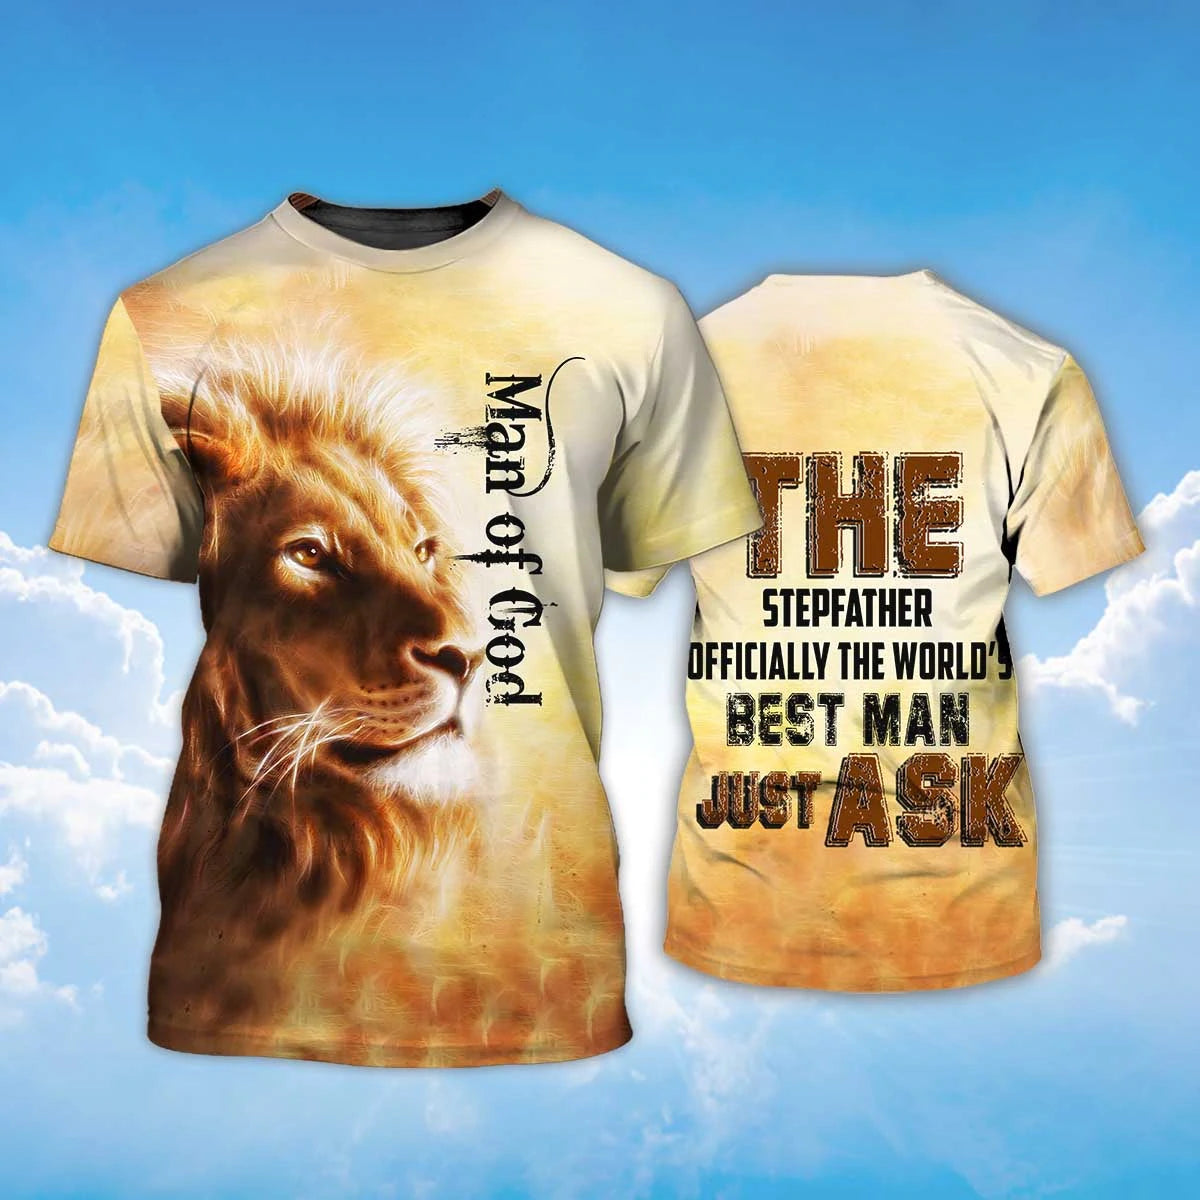 PresentsPrints, The Stepfather Best Man Just ask, Man Of God T-Shirt Full Printed 3D